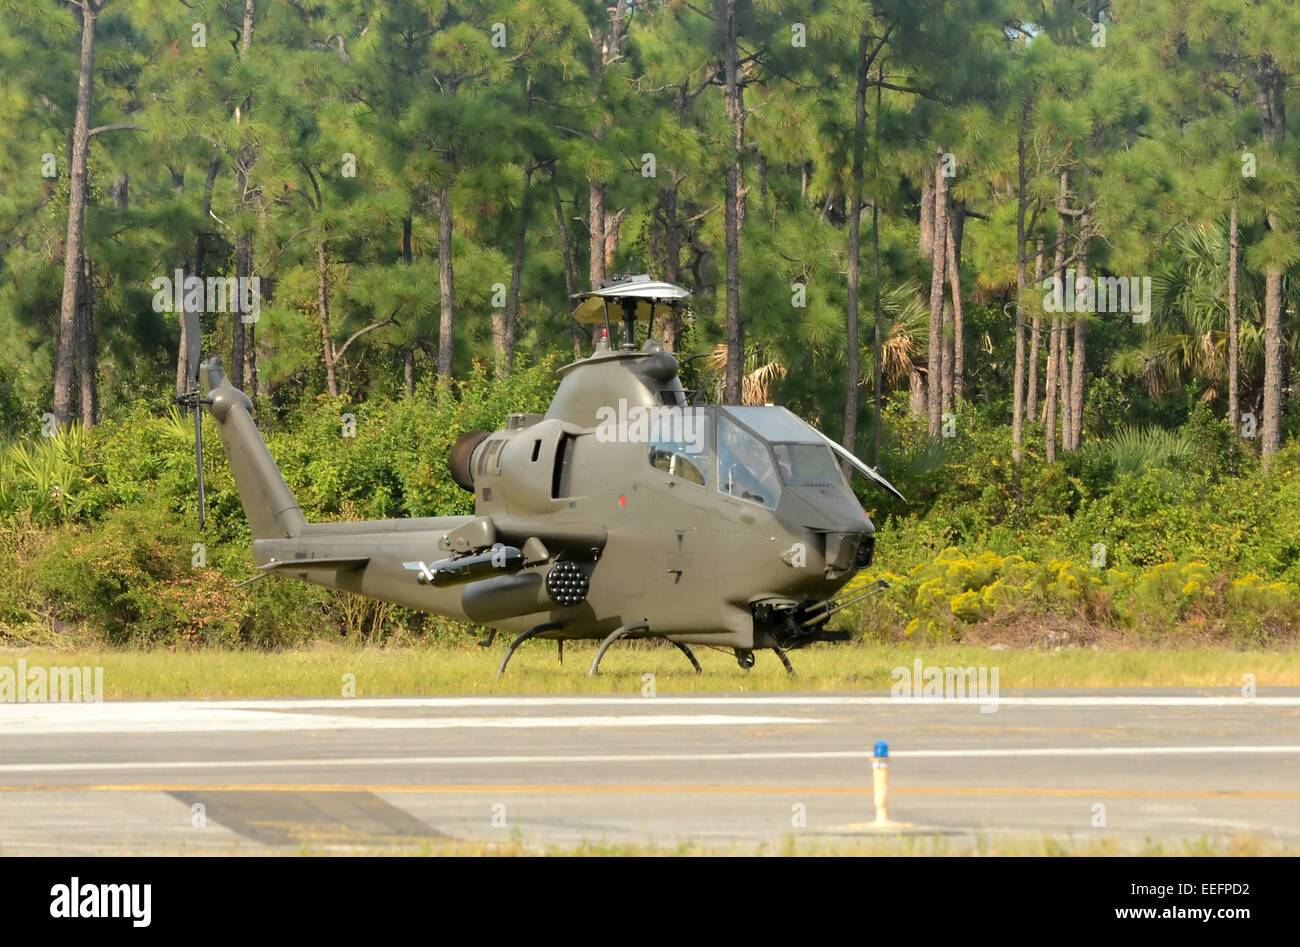 Military helicopter parked in front of trees AH-1 Cobra Stock Photo